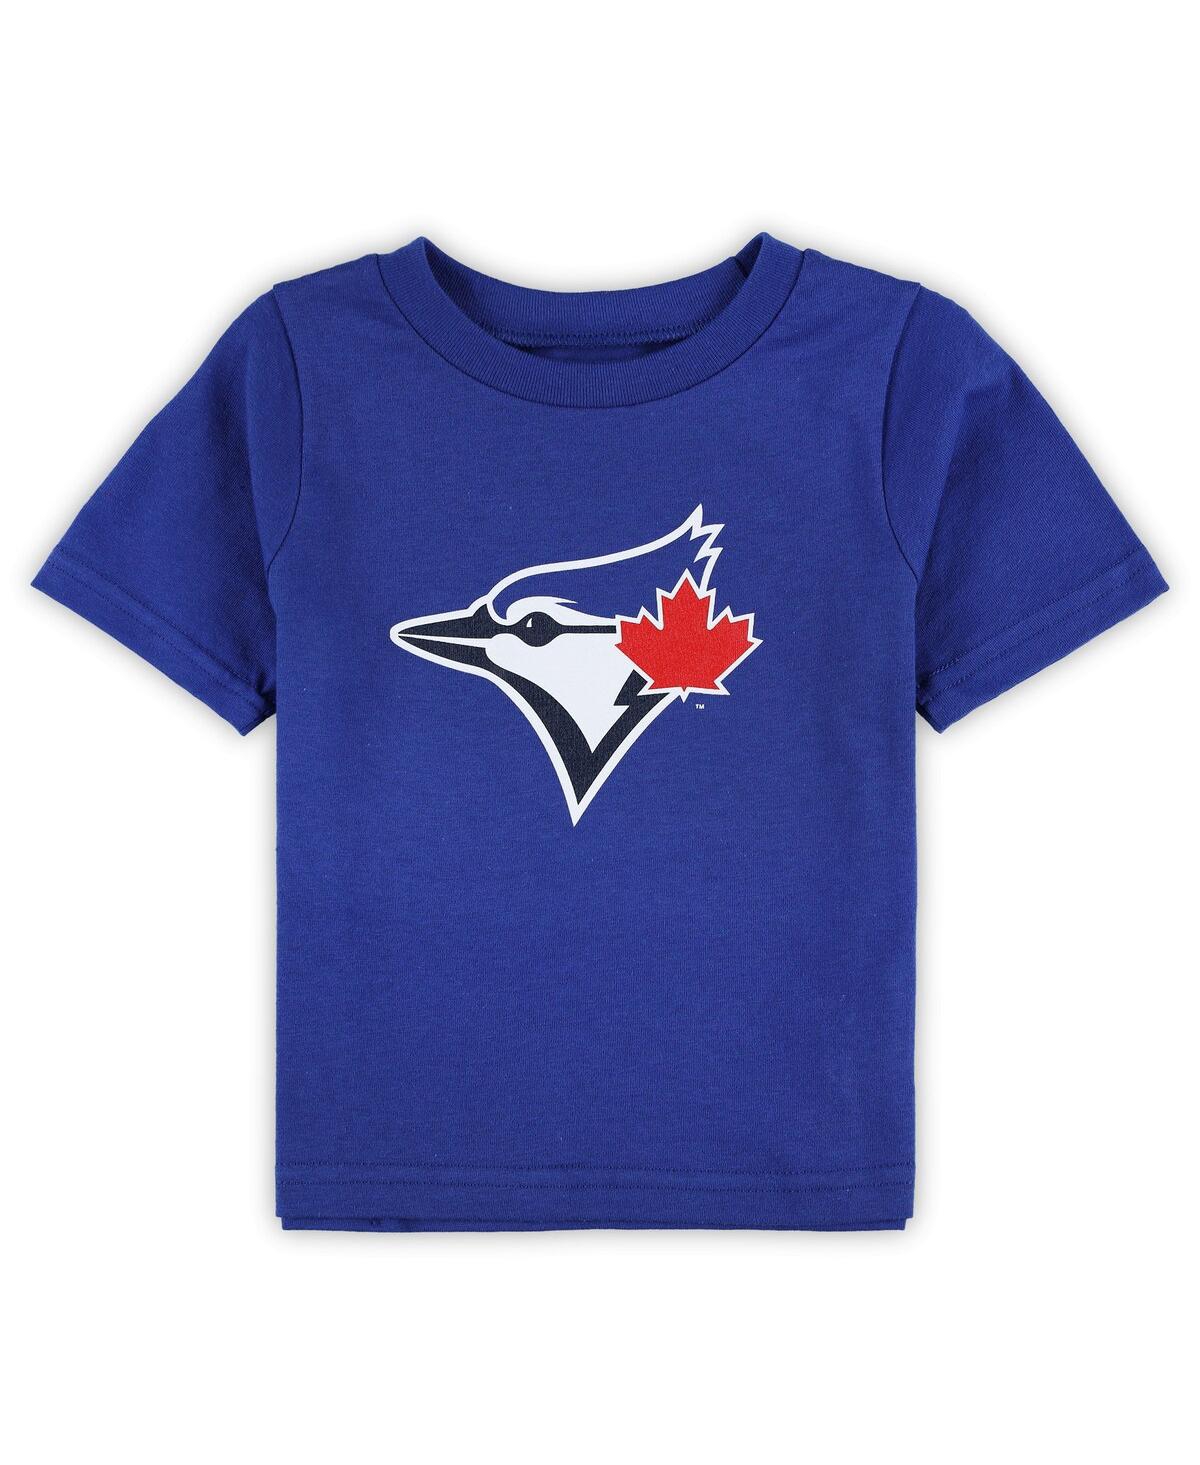 Outerstuff Babies' Infant Boys And Girls Royal Toronto Blue Jays Team Crew Primary Logo T-shirt